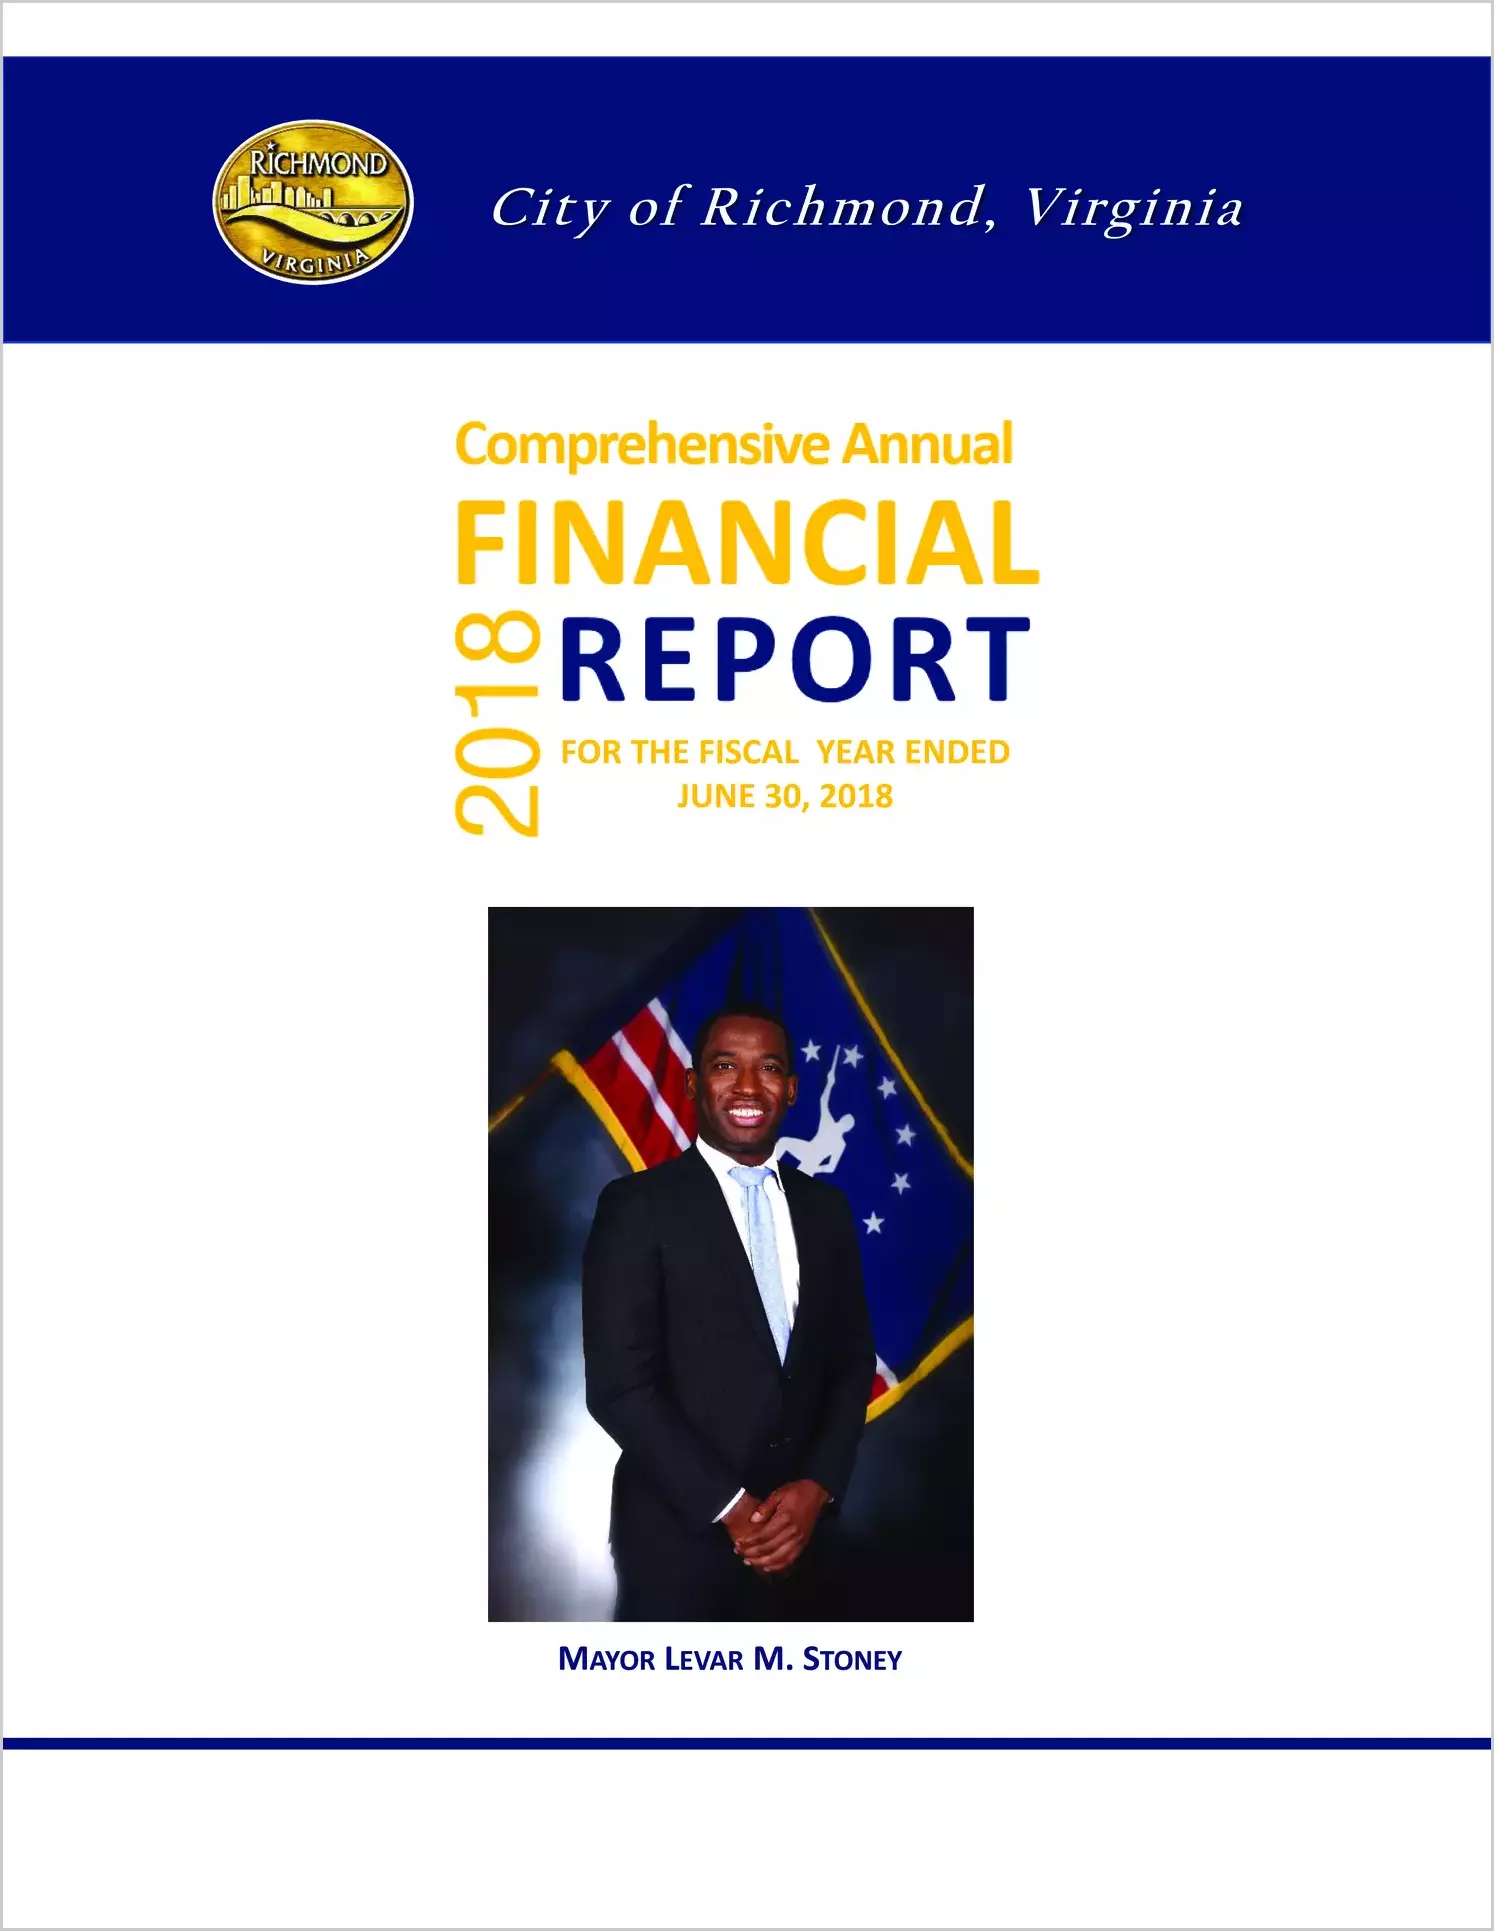 2018 Annual Financial Report for City of Richmond